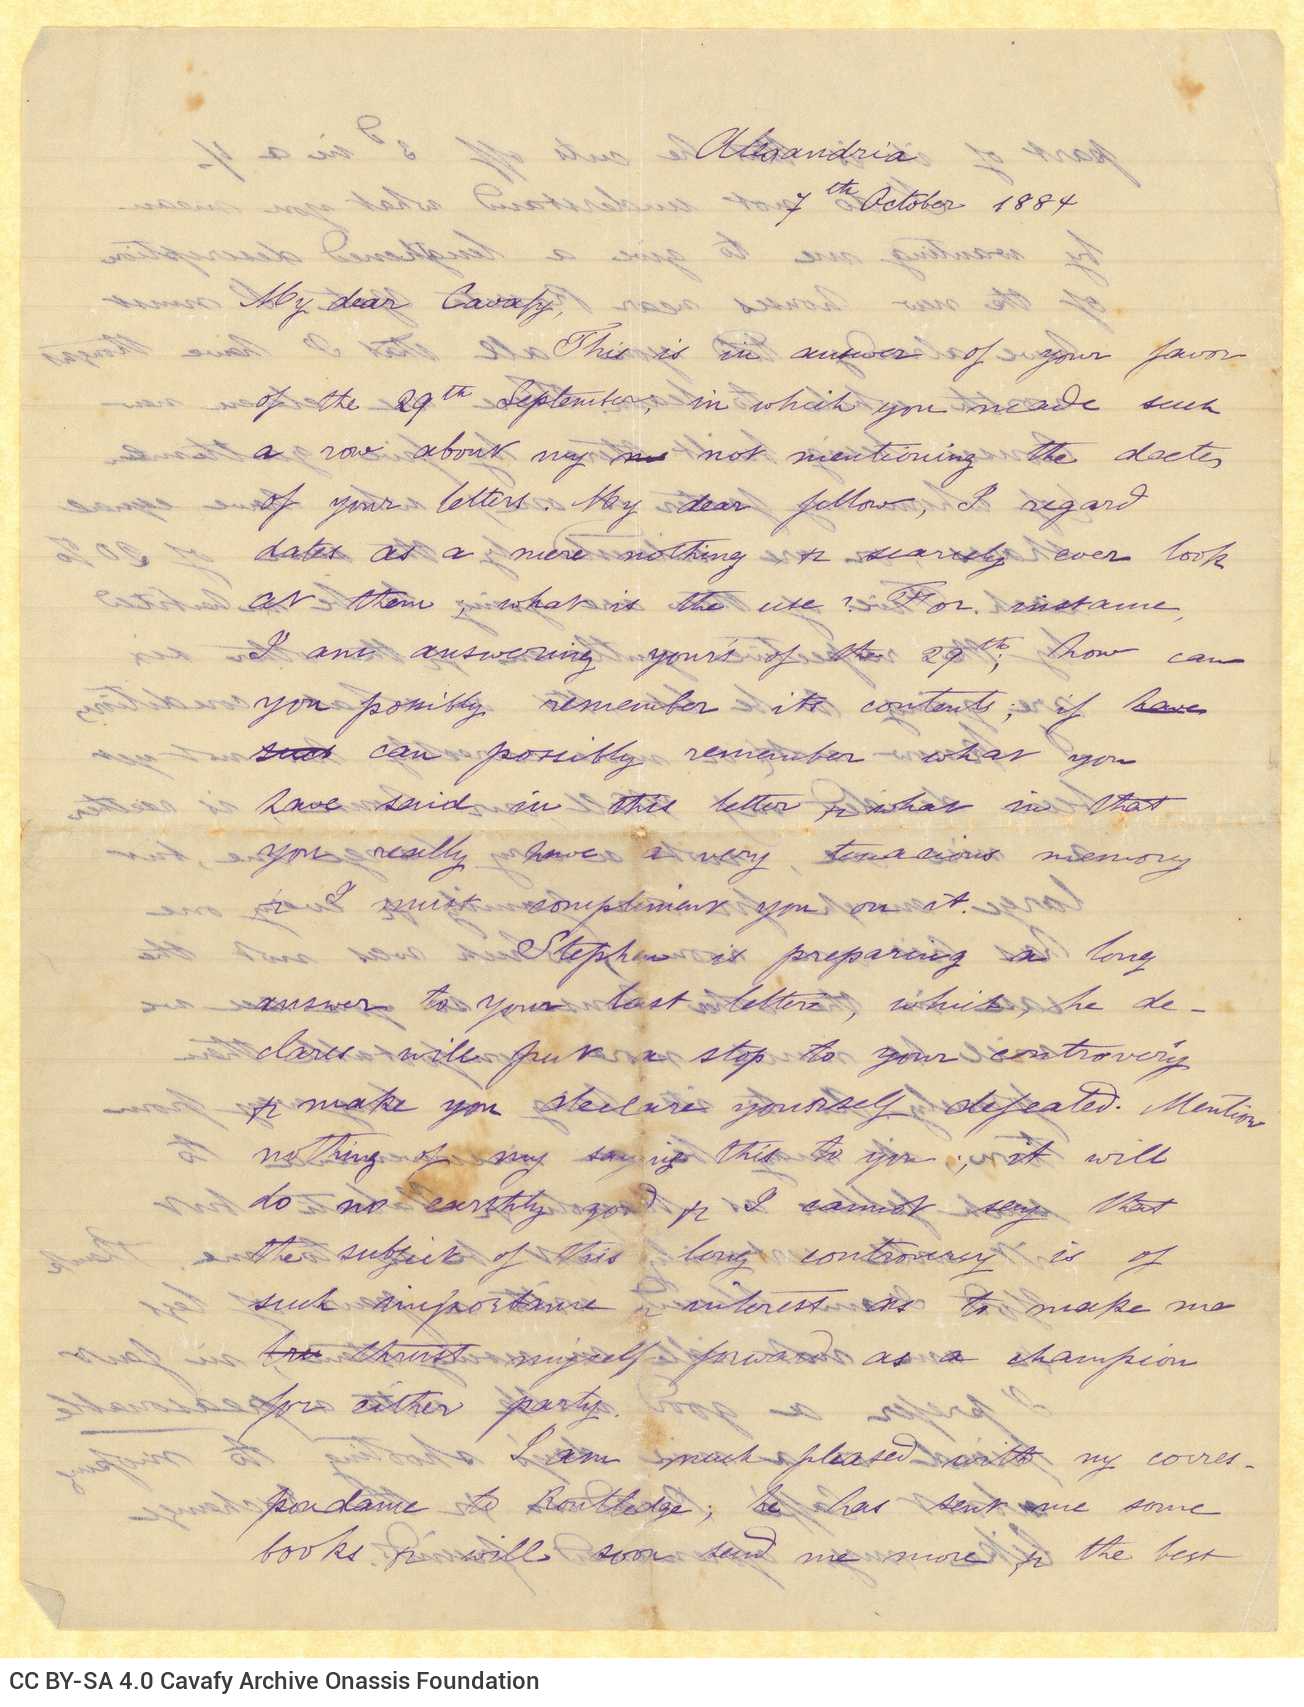 Handwritten letter by Mike Ralli to Cavafy in two sheets, with notes on all sides. It is a reply to a letter dated 29 Septemb